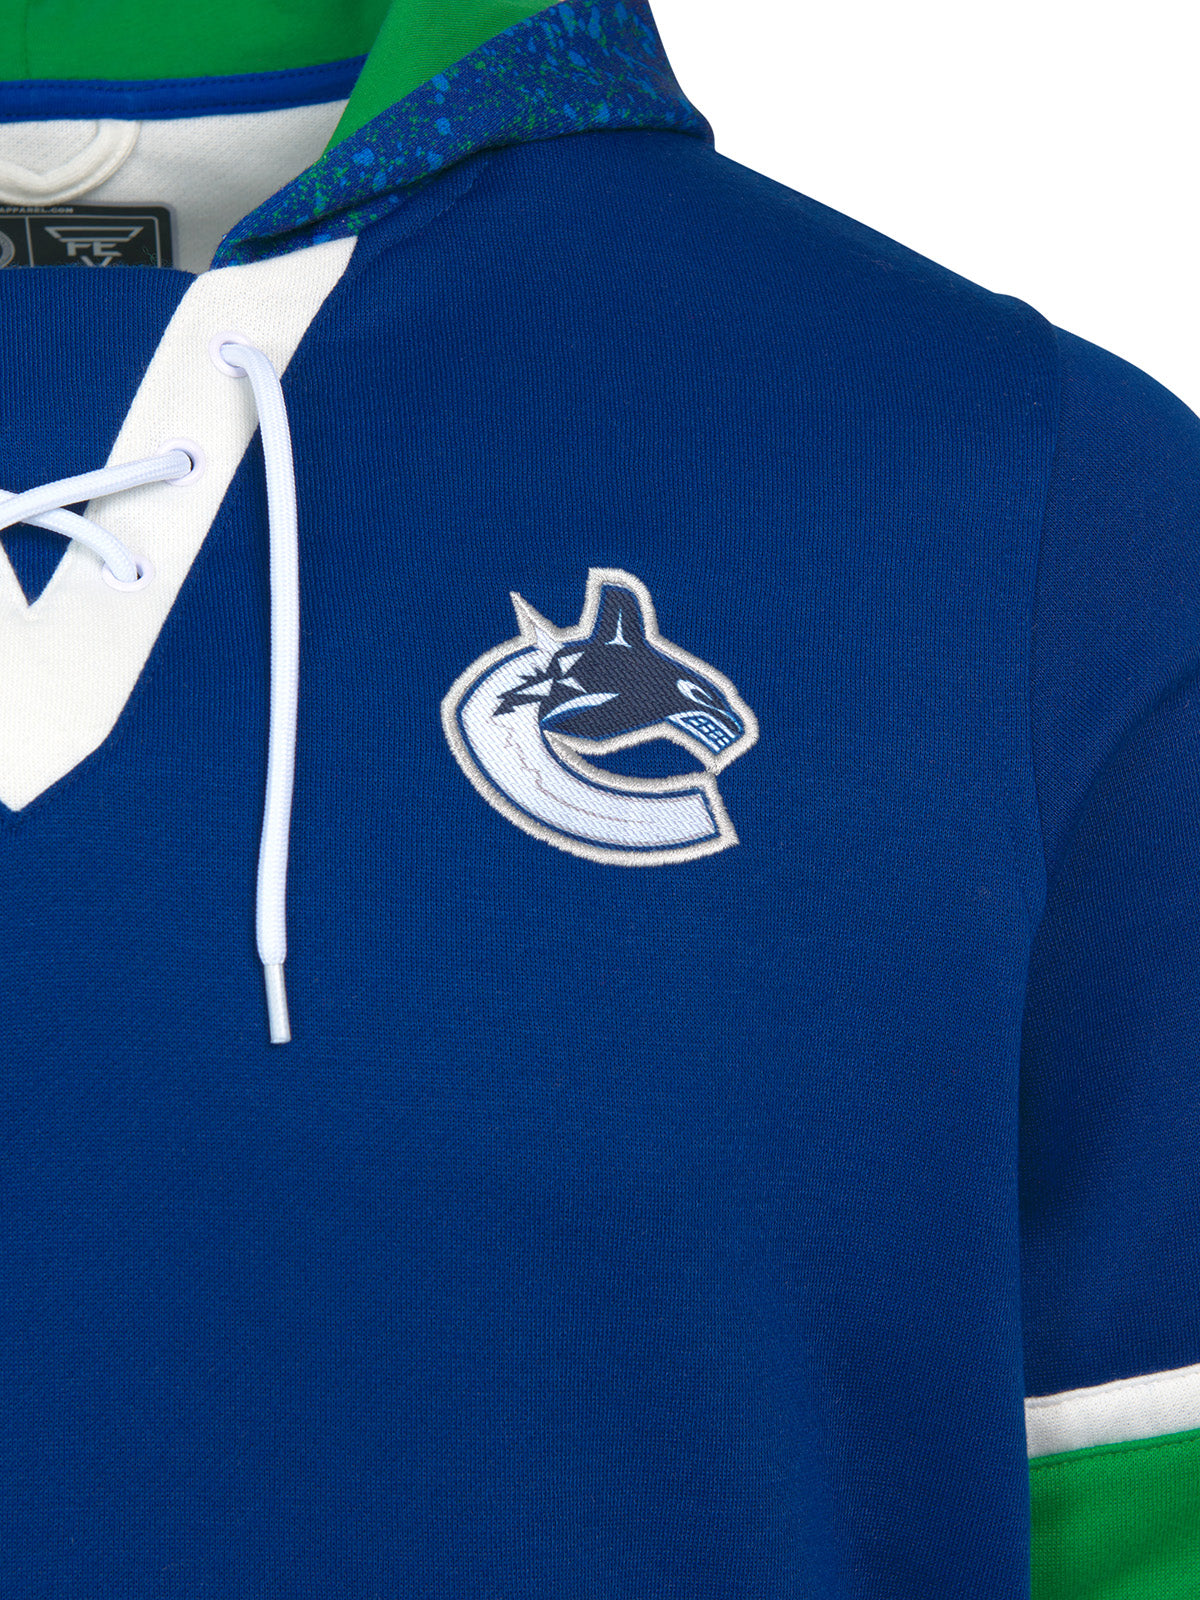 Vancouver Canucks Lace-Up Hoodie